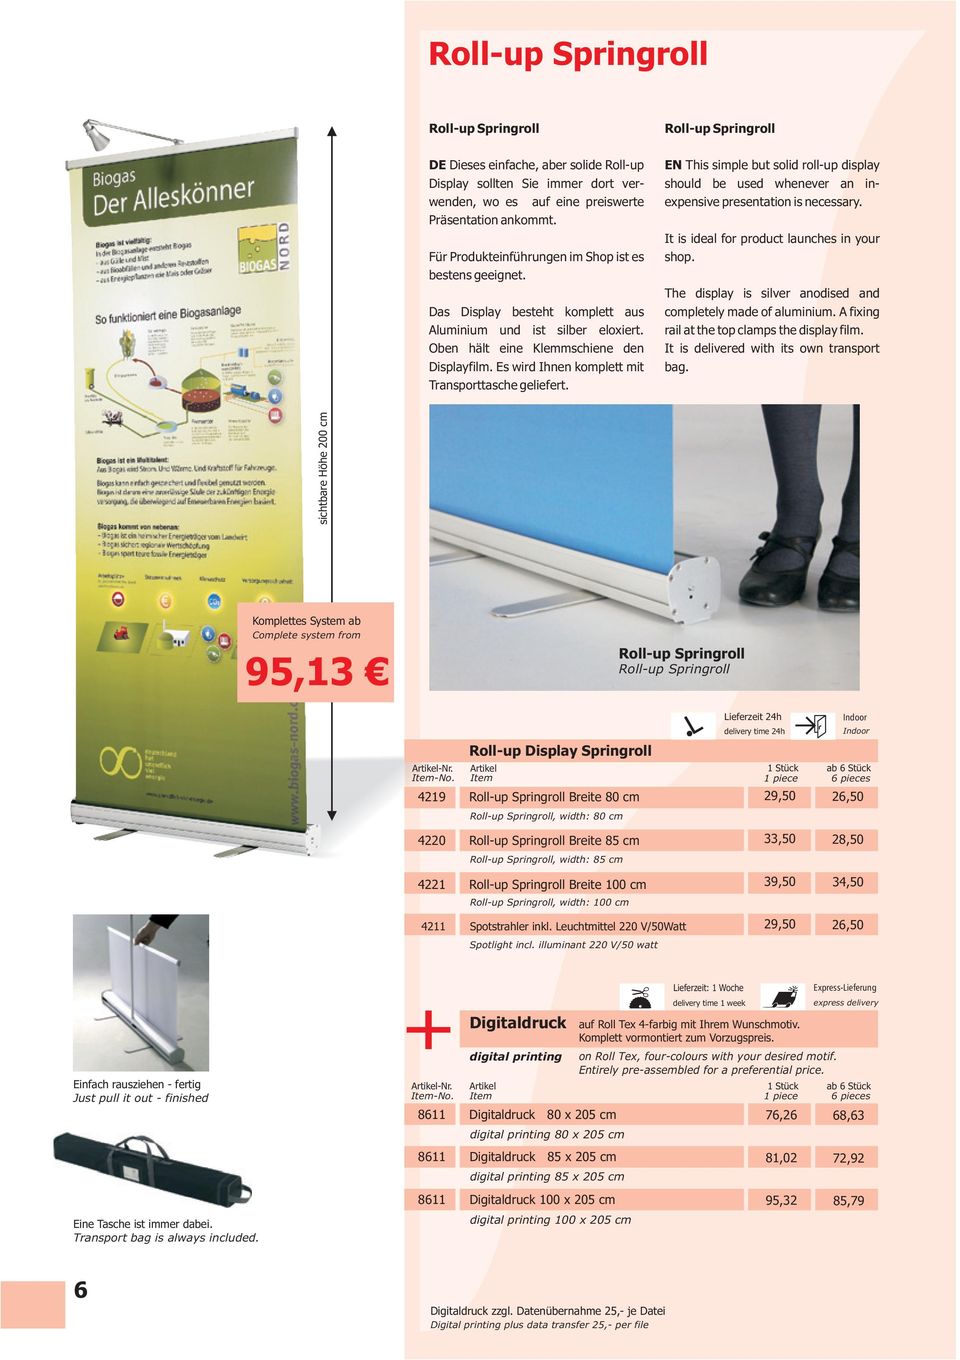 Es wird Ihnen komplett mit Transporttasche geliefert. Roll-up Springroll EN This simple but solid roll-up display should be used whenever an inexpensive presentation is necessary.